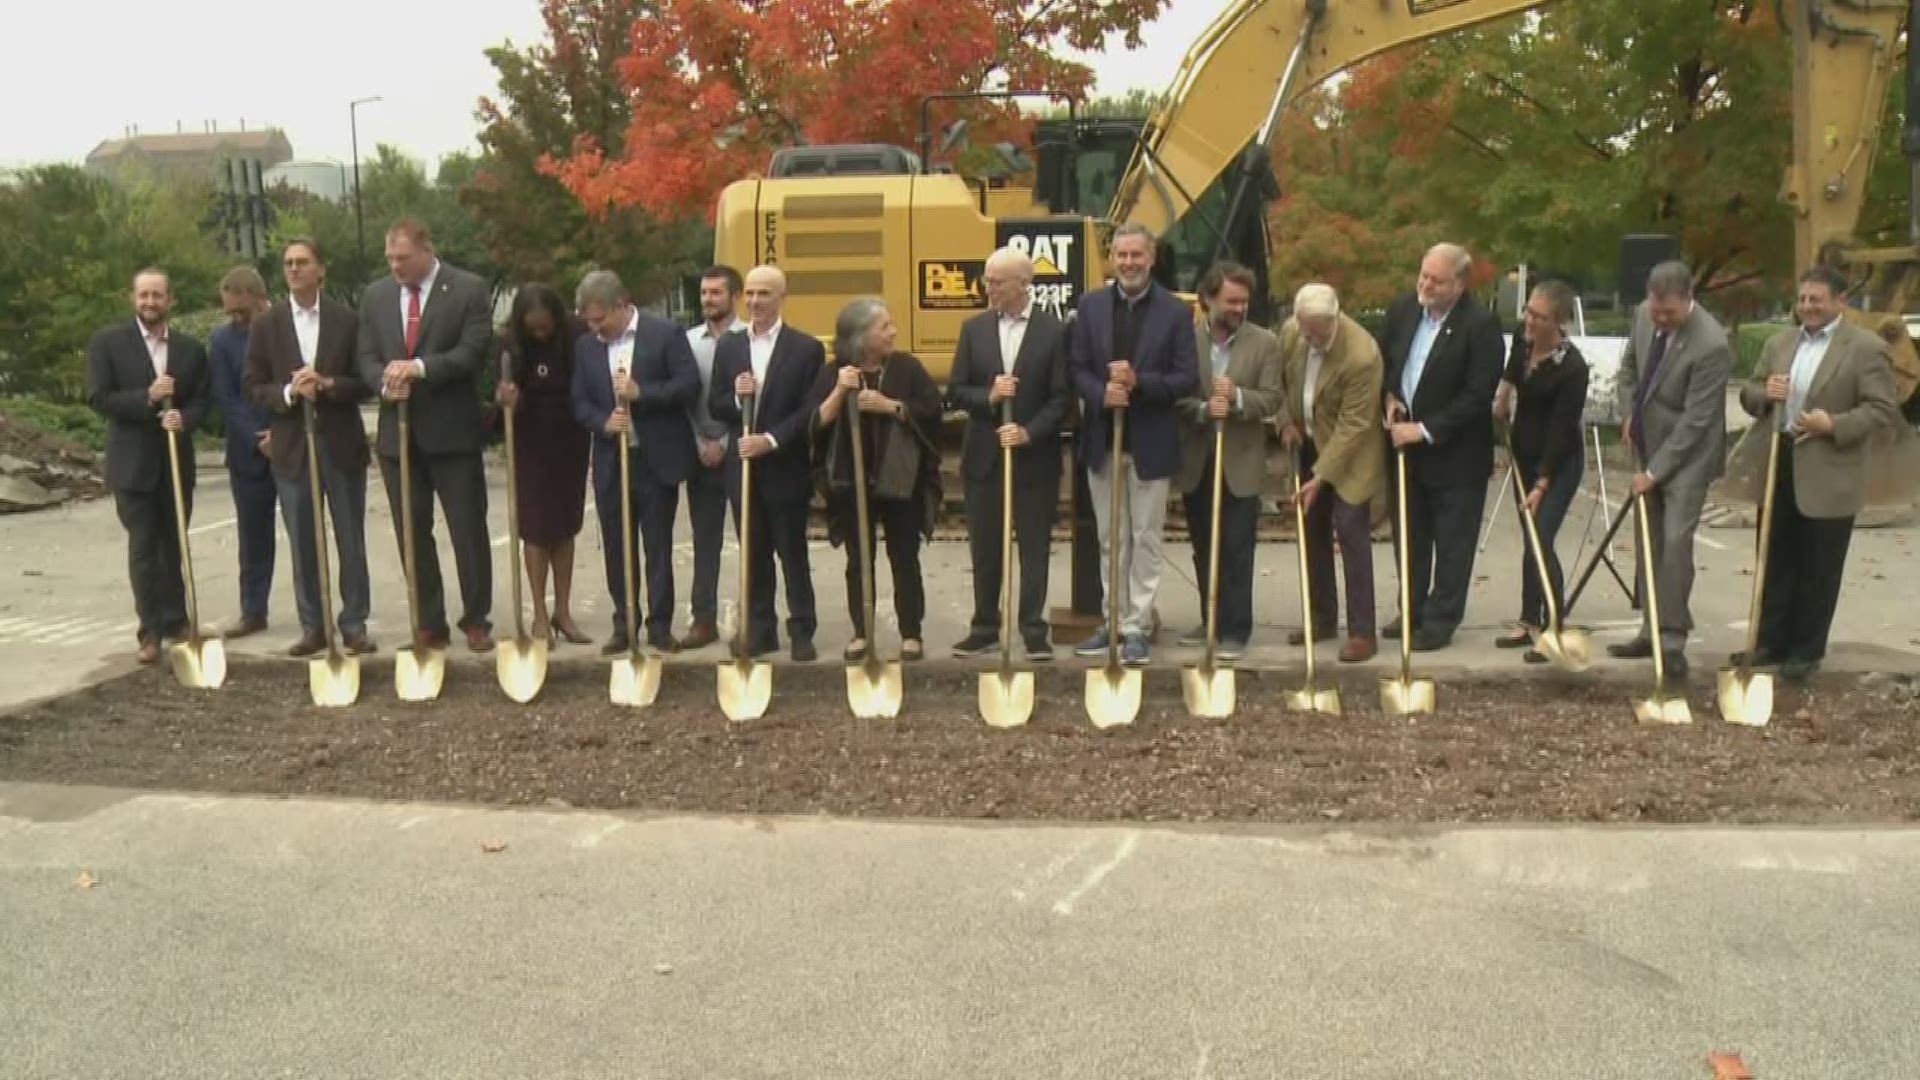 Developers and city leaders broke ground on a new apartment complex, kicking off renovations that will transform the old State Supreme Court building.